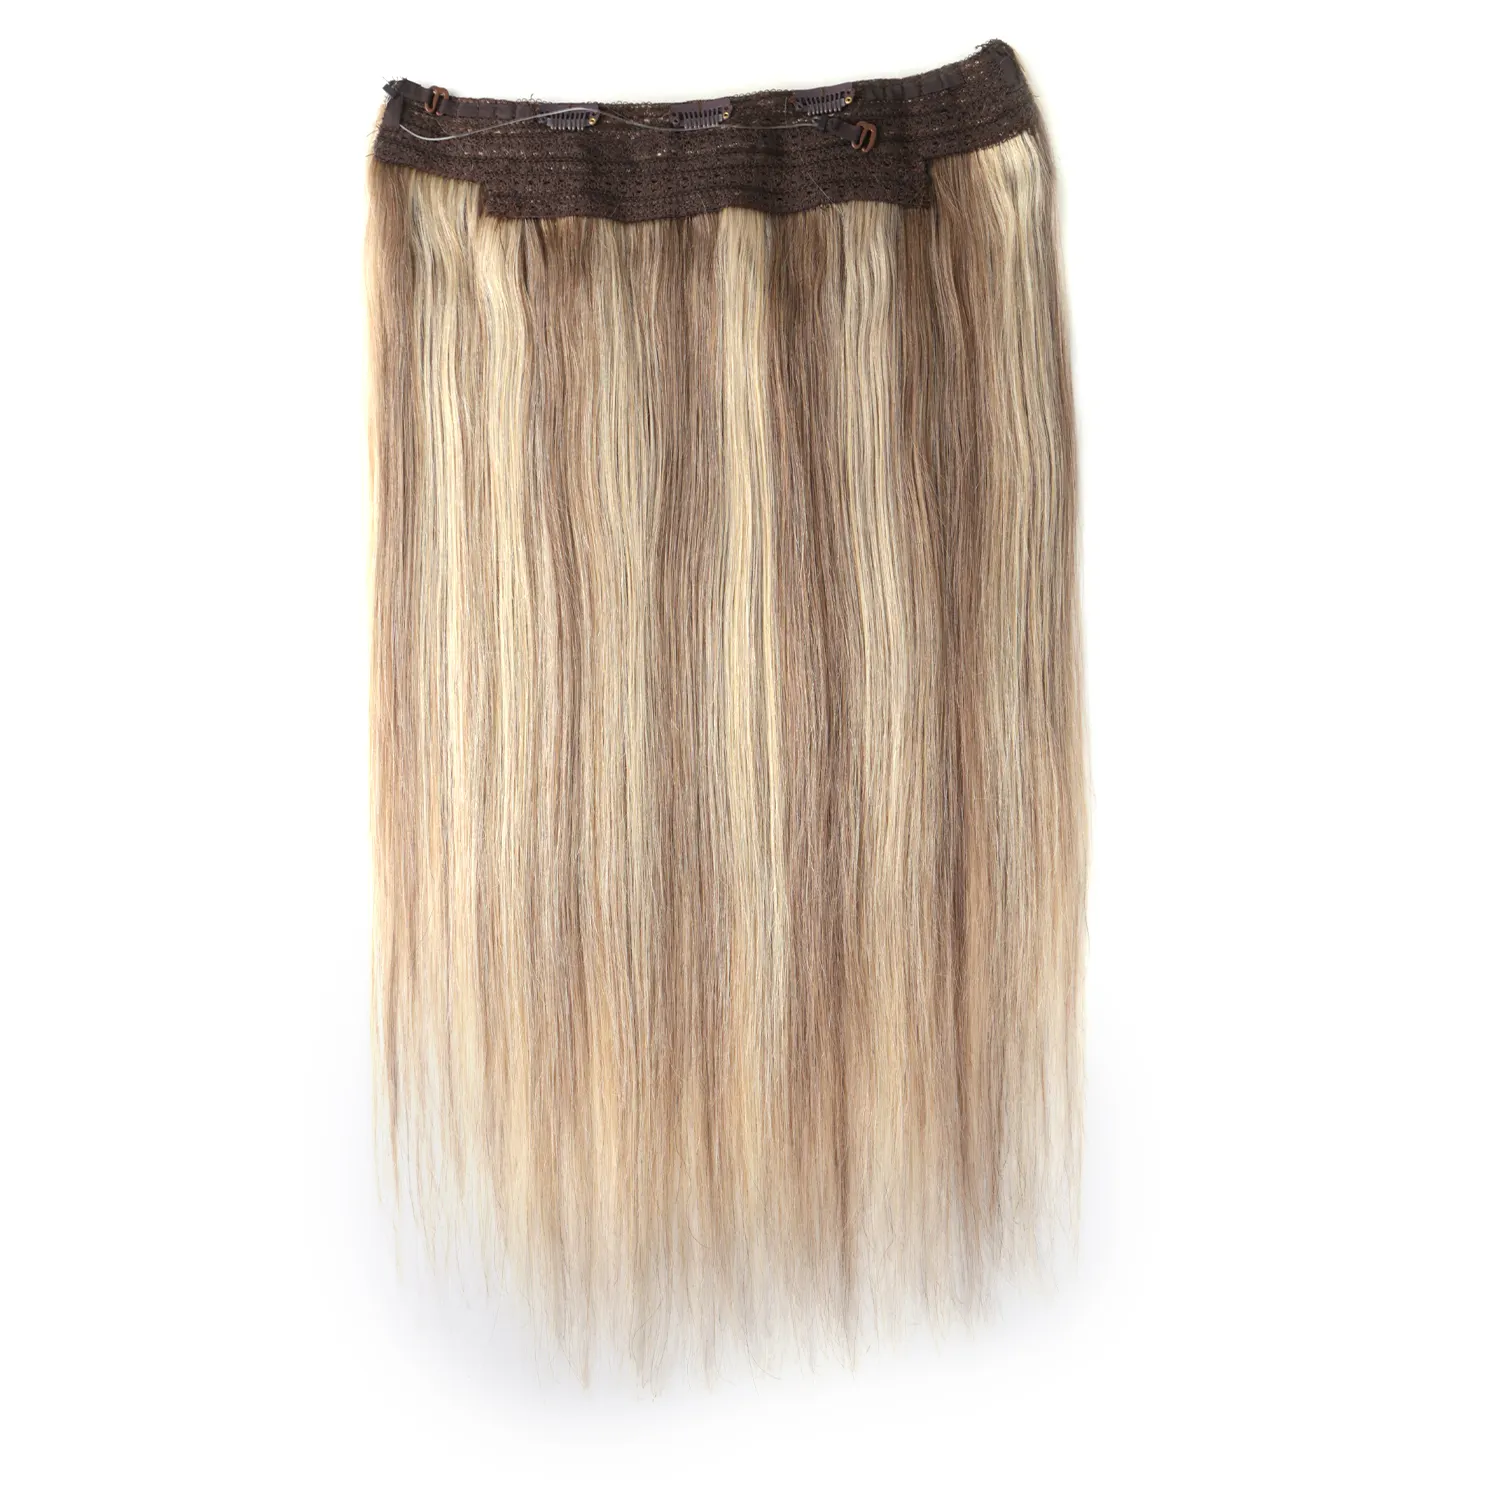 100% Halo Hair Mix Color Real Hair Extensions for Seamless Blending Instantly Add Volume & Length for Women